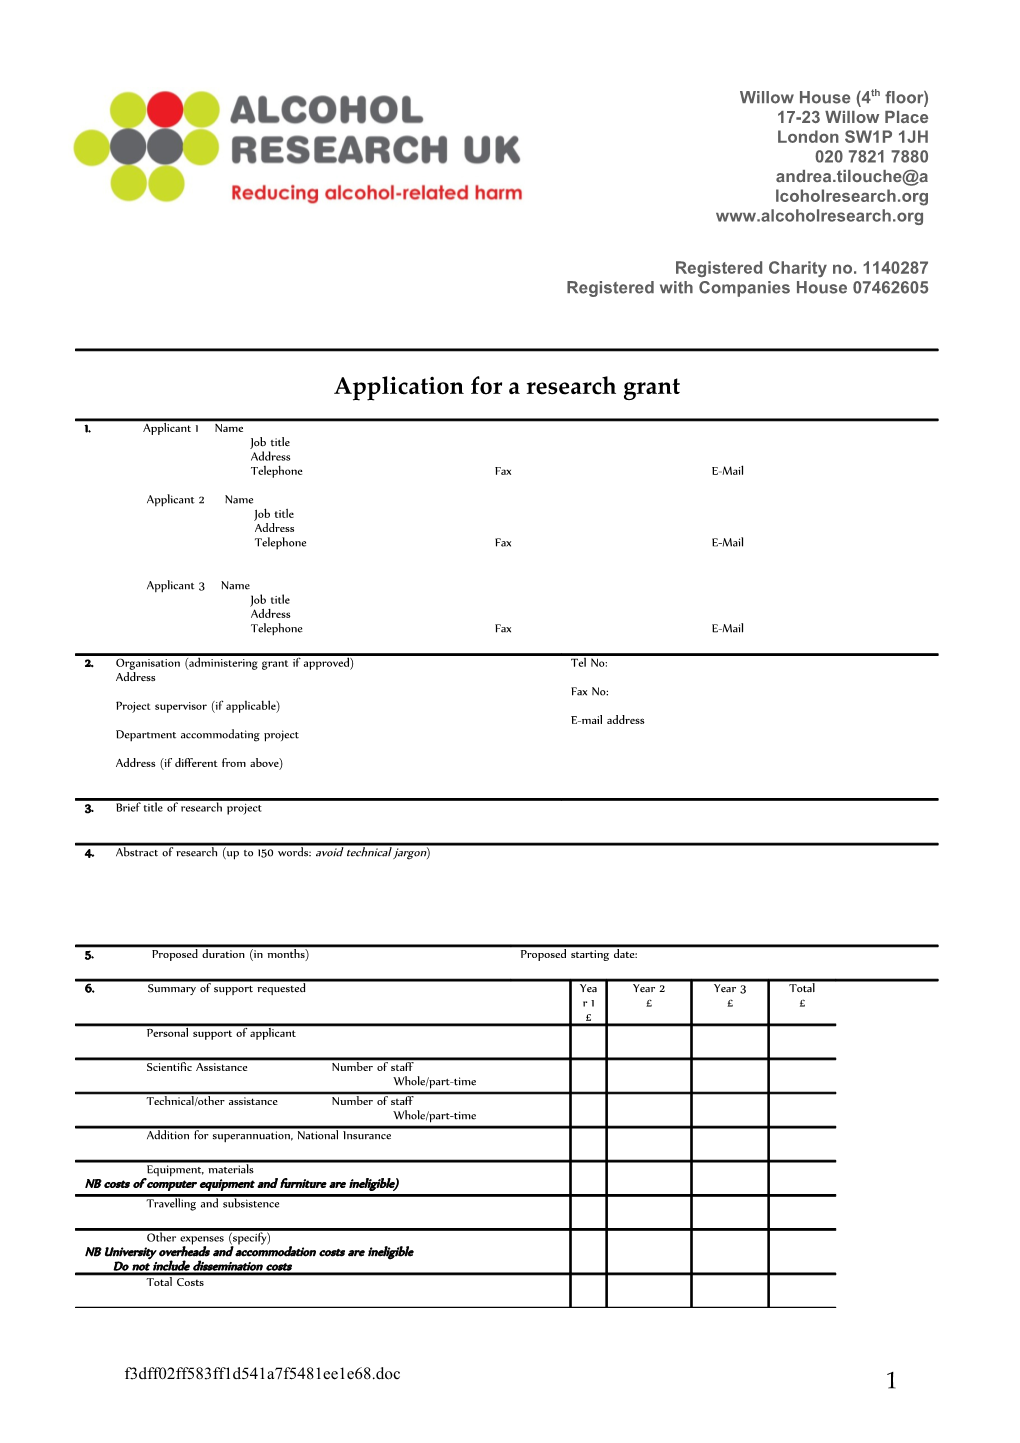 Application for a Research Grant